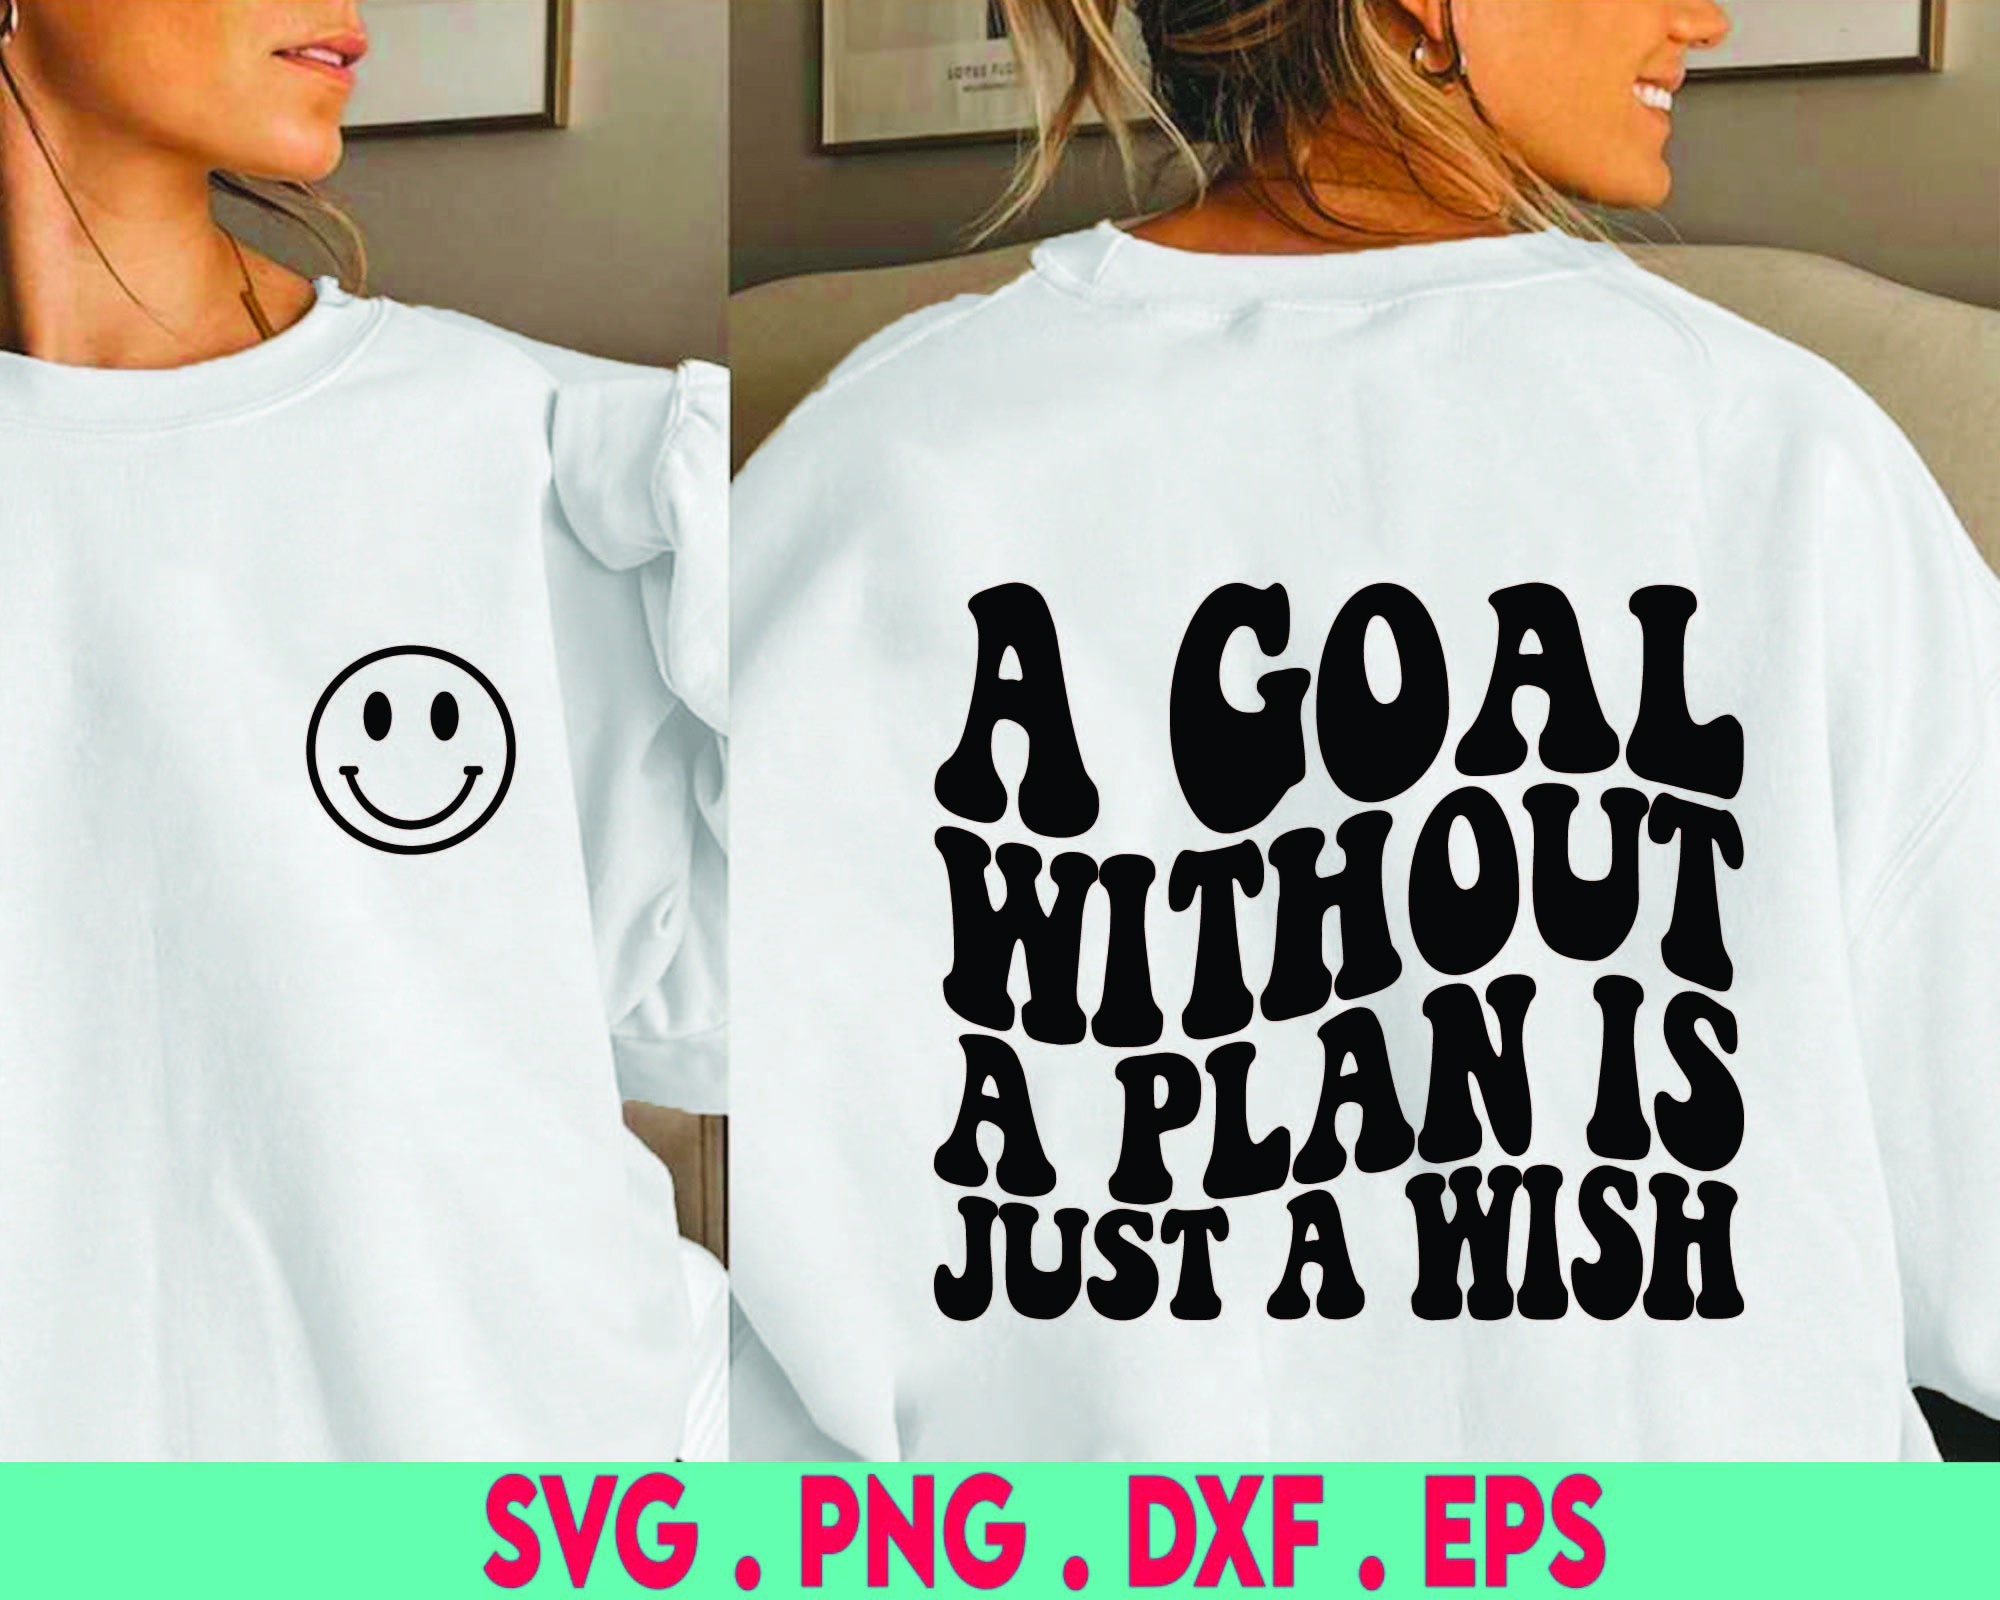 A Goal Without A Plan Printed T-shirts